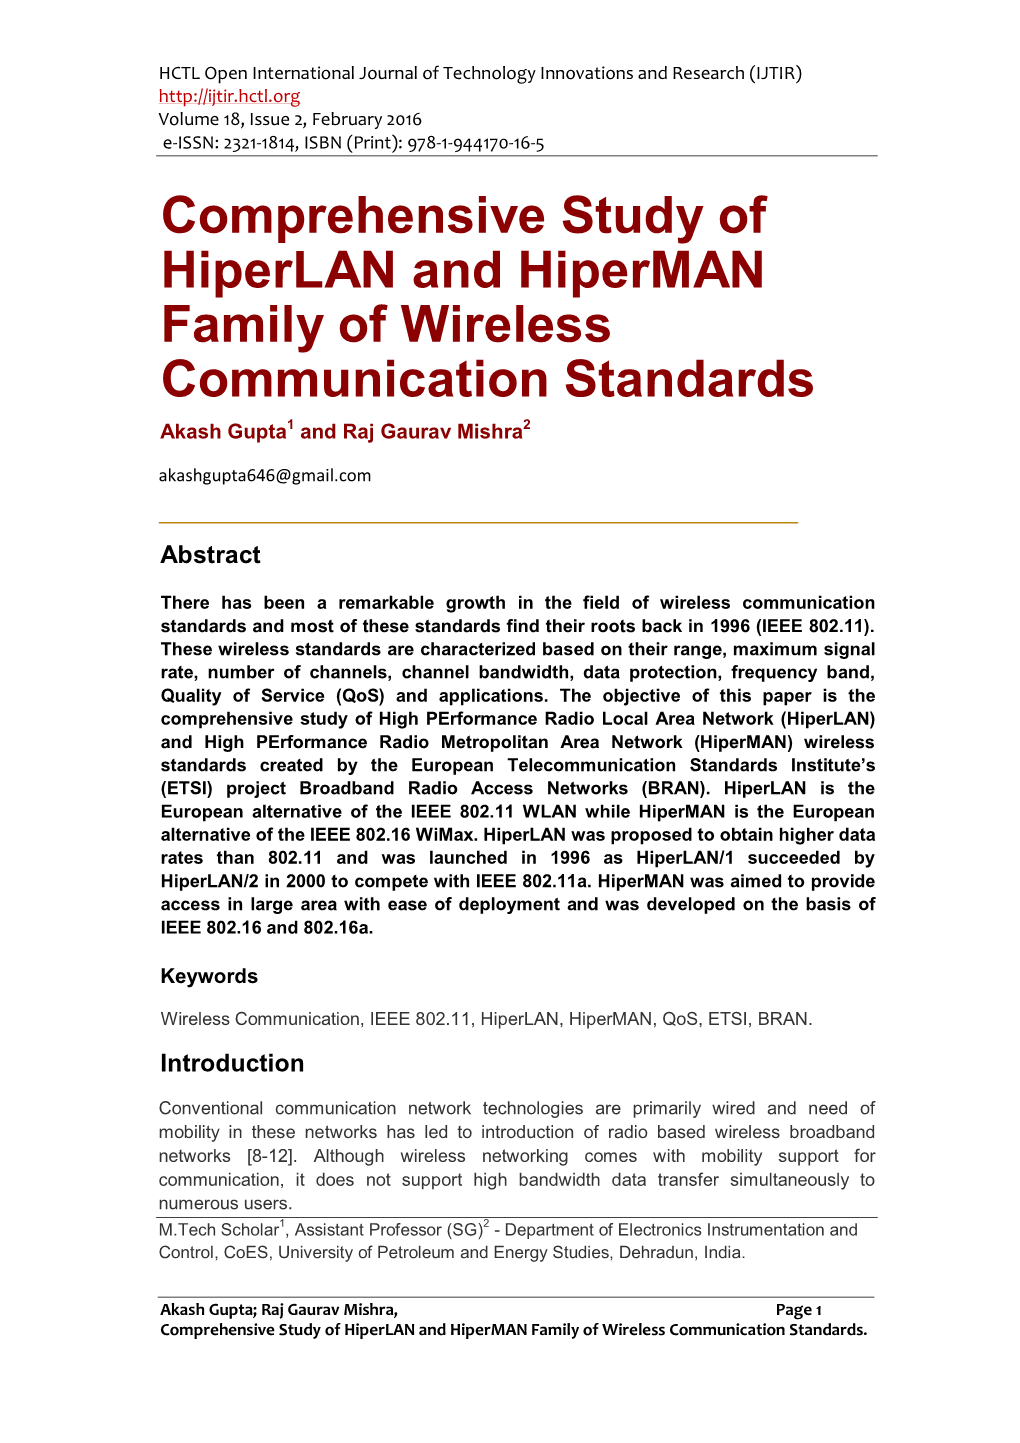 Comprehensive Study of Hiperlan and Hiperman Family of Wireless Communication Standards